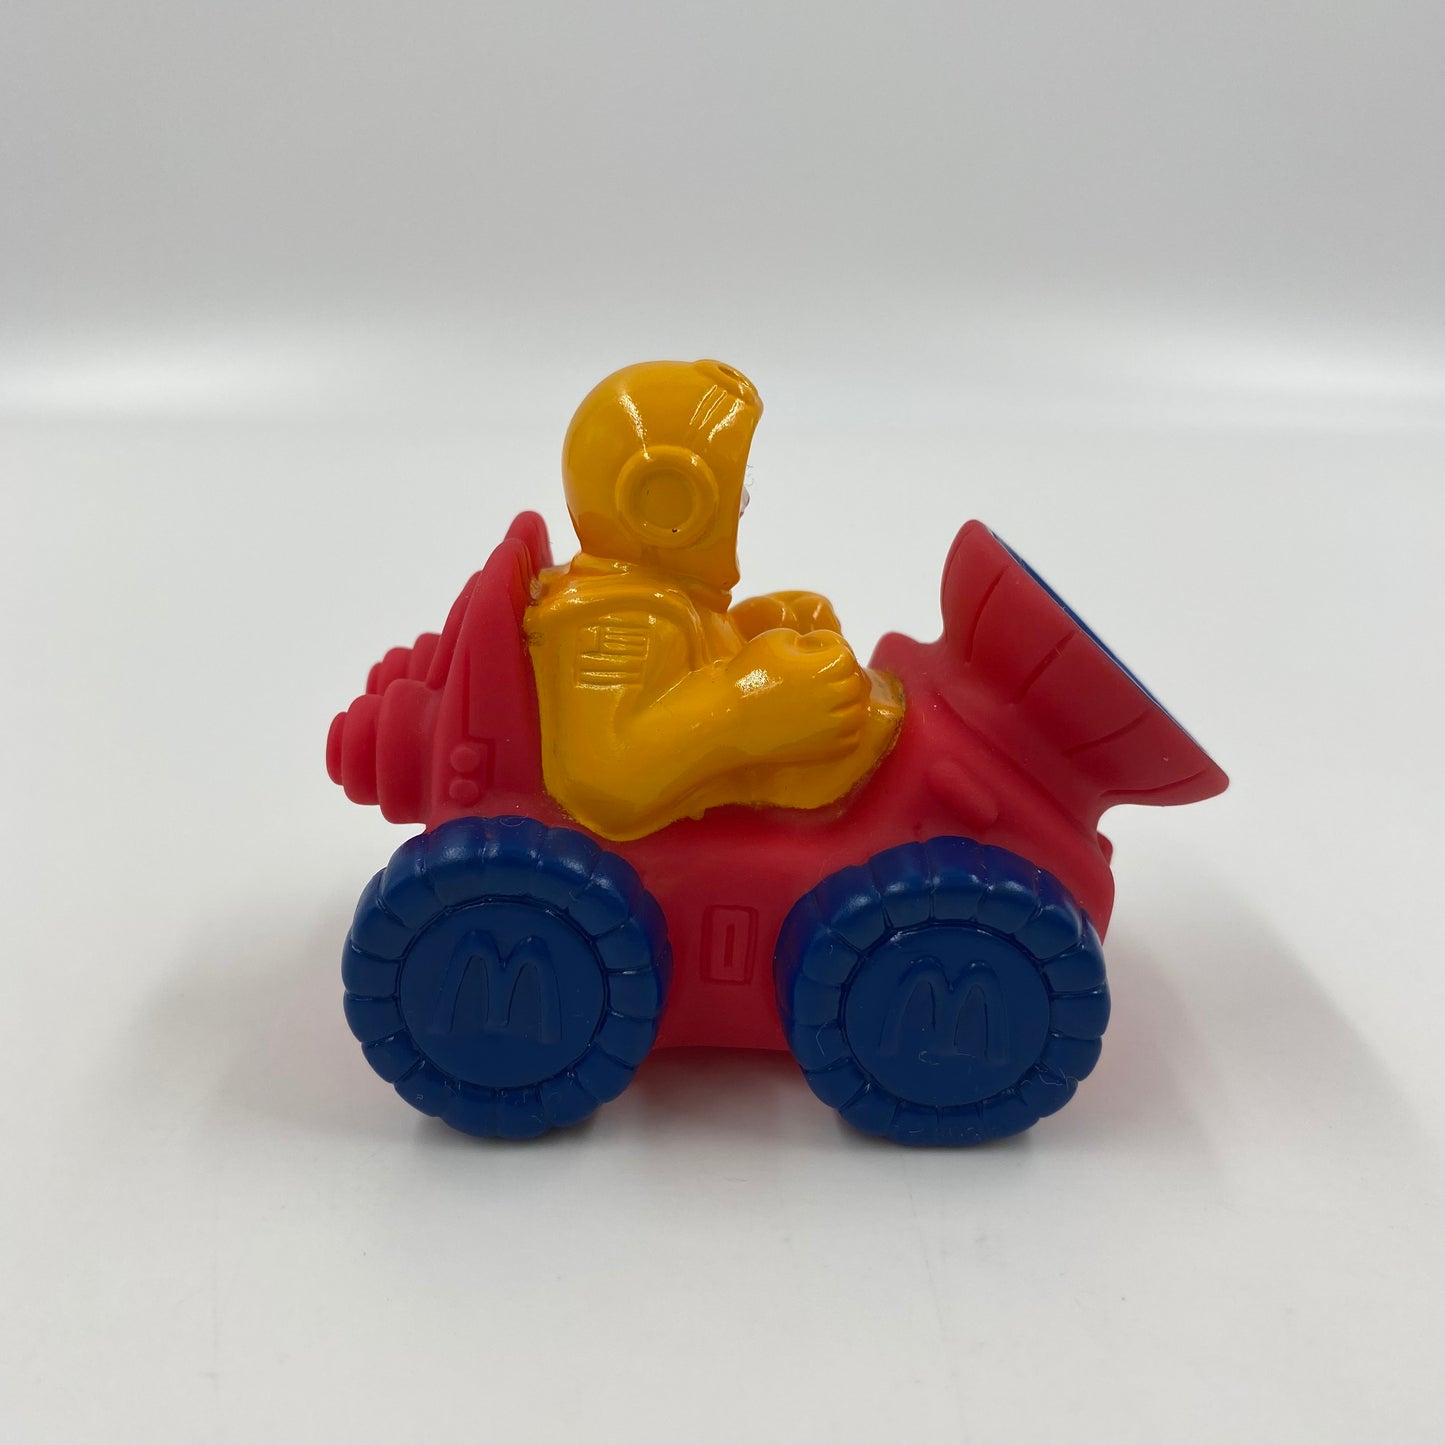 Young Astronauts Ronald McDonald in Lunar Rover McDonald's Happy Meal under 3 toy (1992) loose